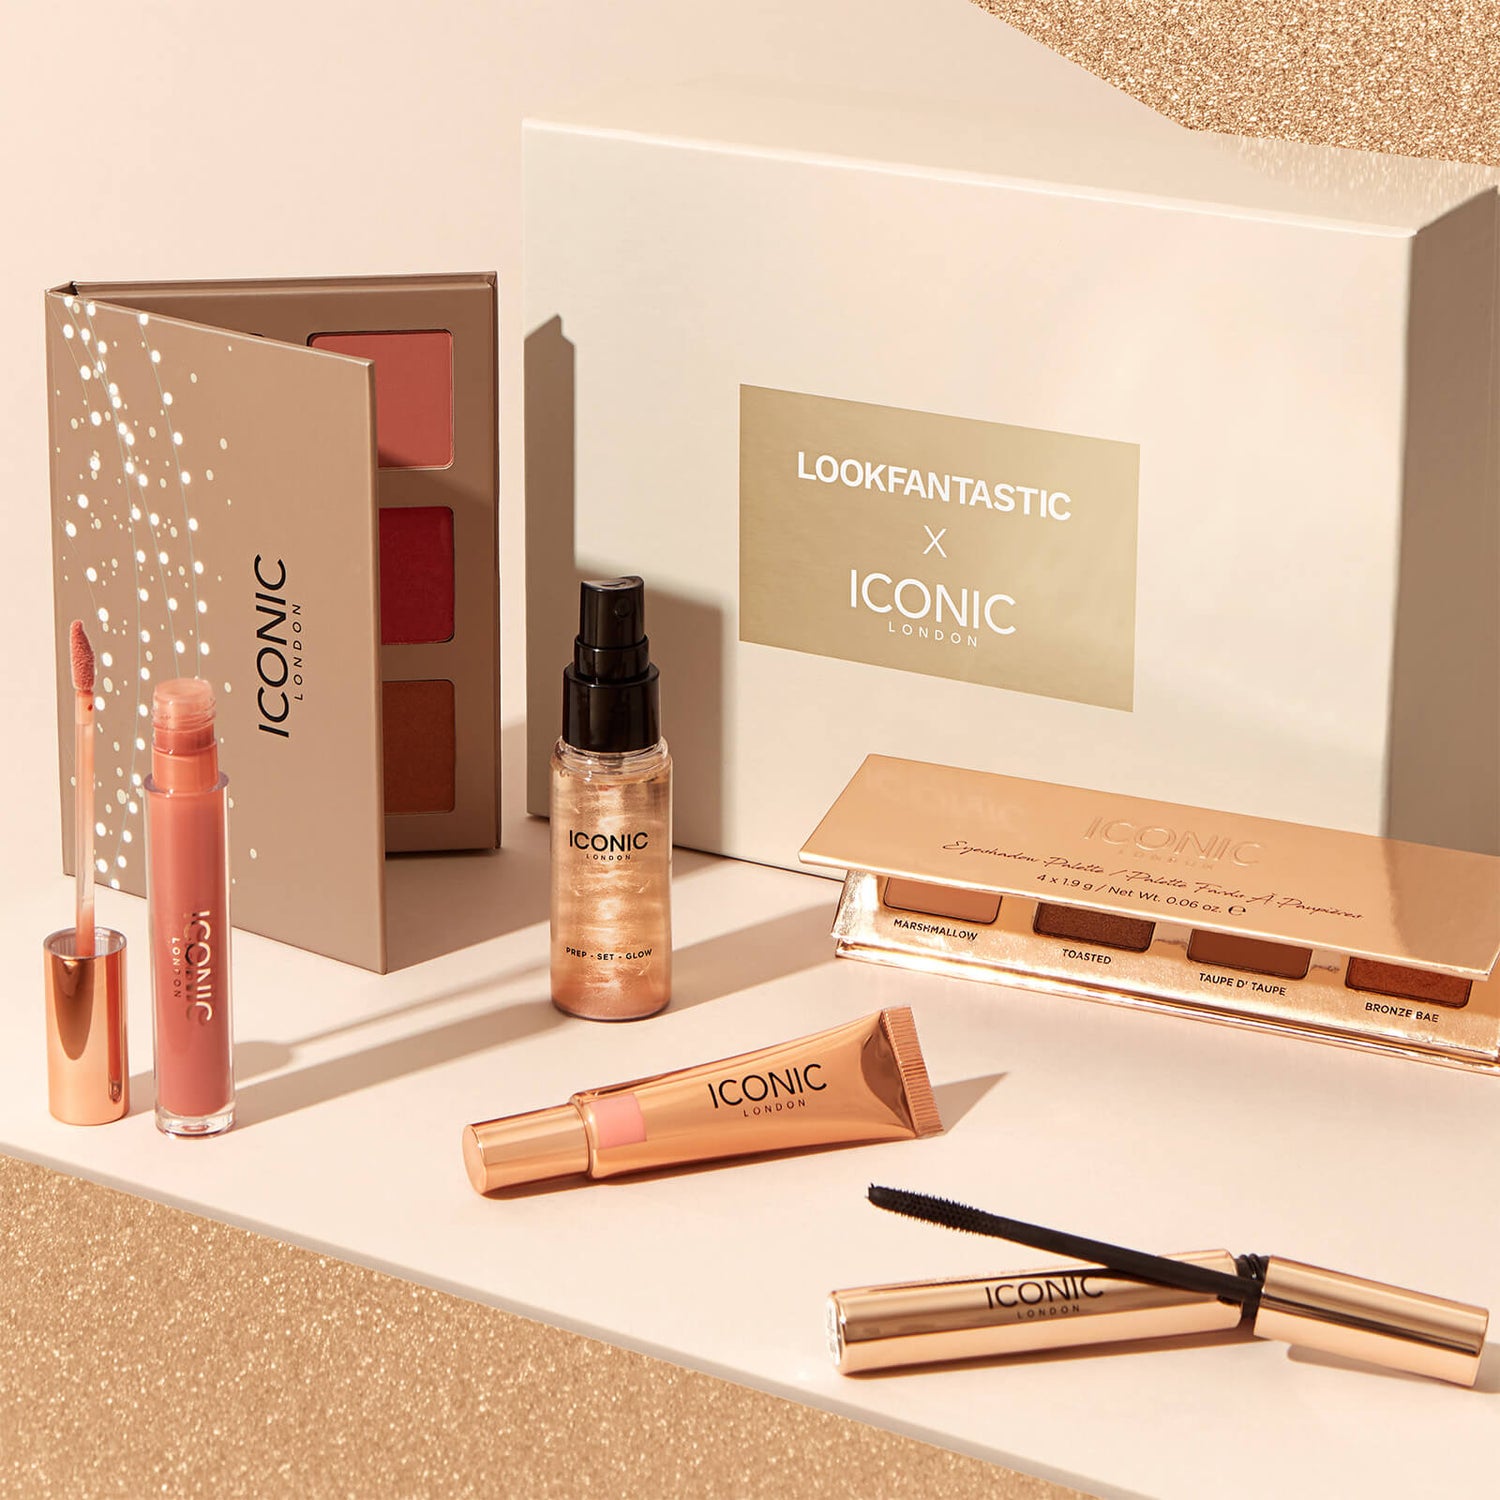 LOOKFANTASTIC x ICONIC Londen Limited Edition Beauty Box